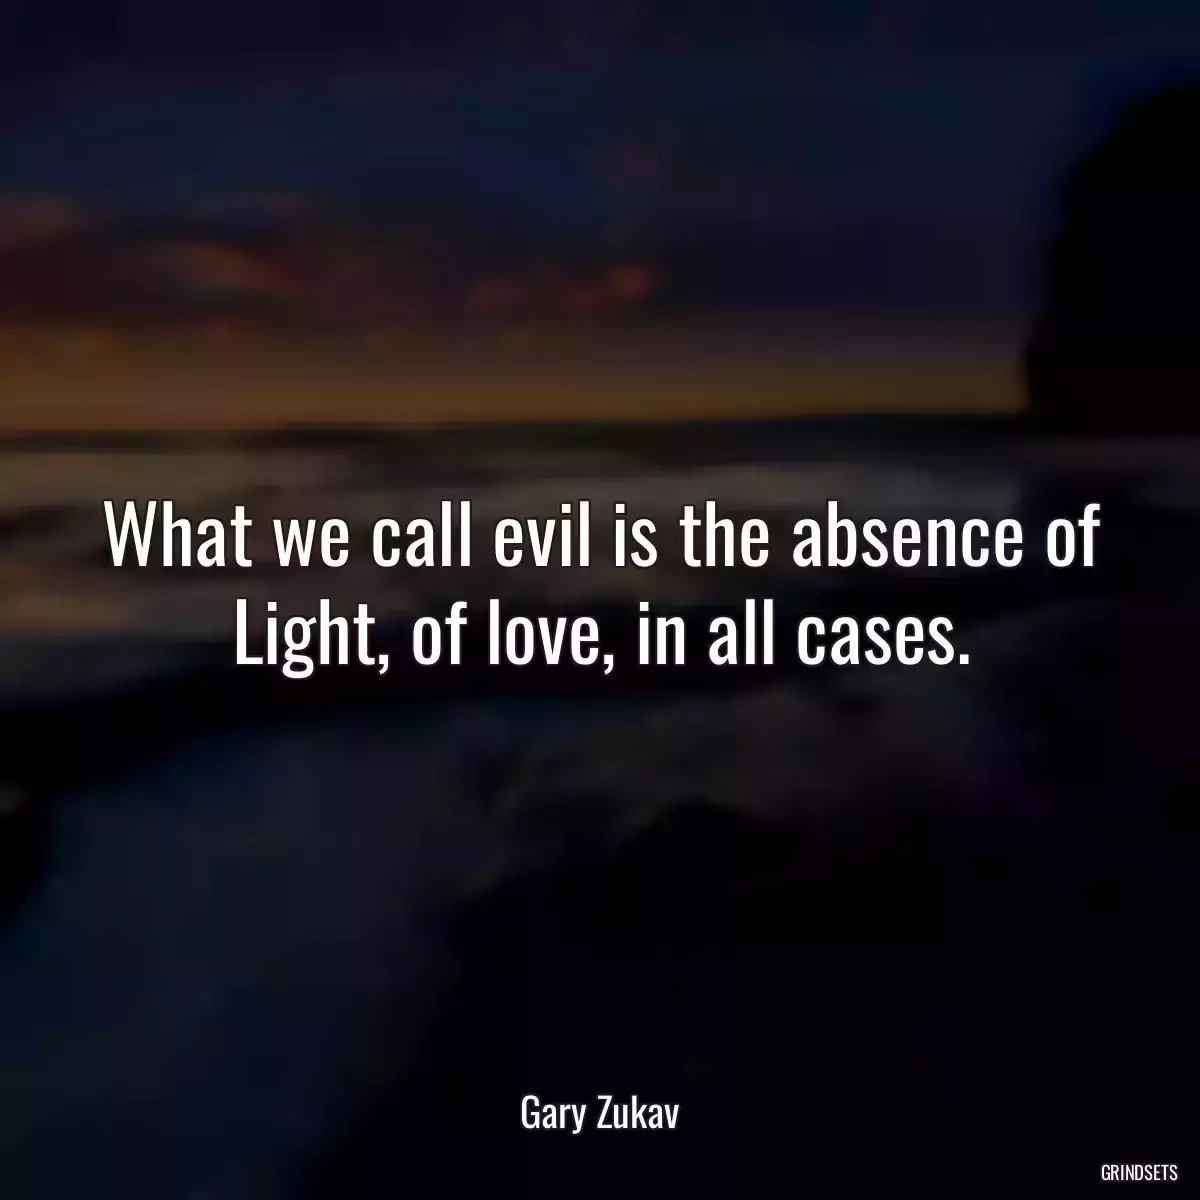 What we call evil is the absence of Light, of love, in all cases.